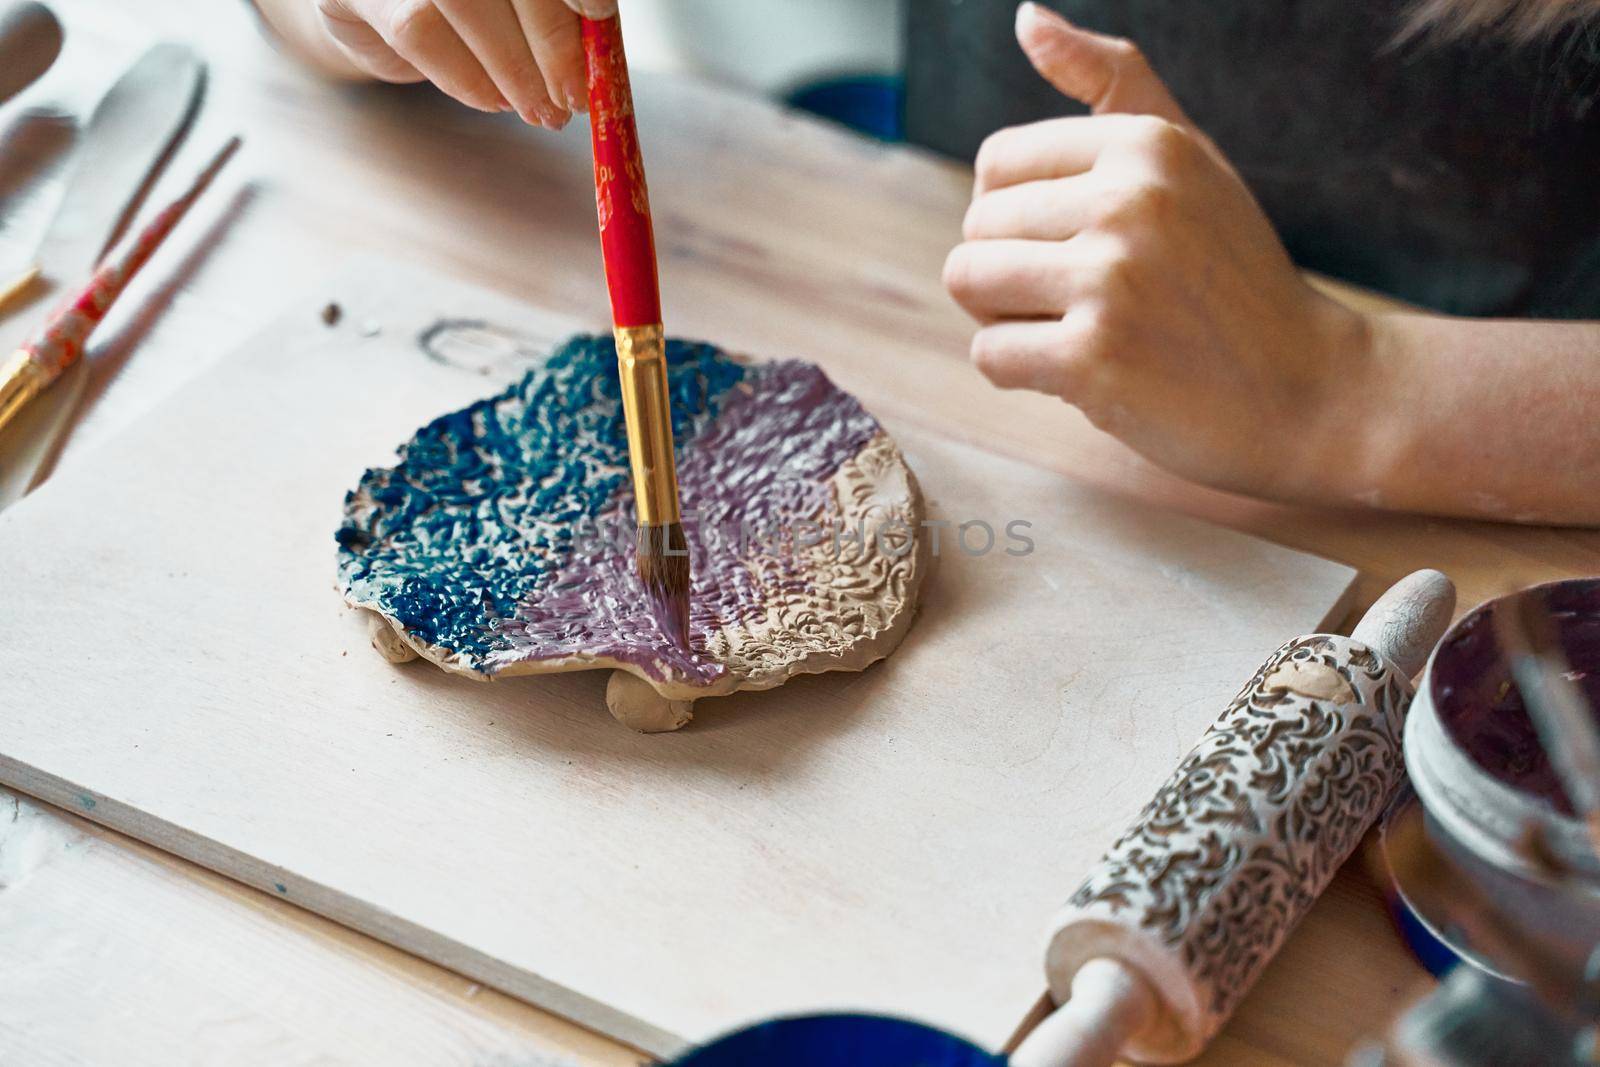 Unrecognised Woman making pattern on ceramic plate, hands close-up, focus on palms with paint brush. Creative hobby concept. Earn extra money, side hustle, turning hobbies into cash, passion into a job